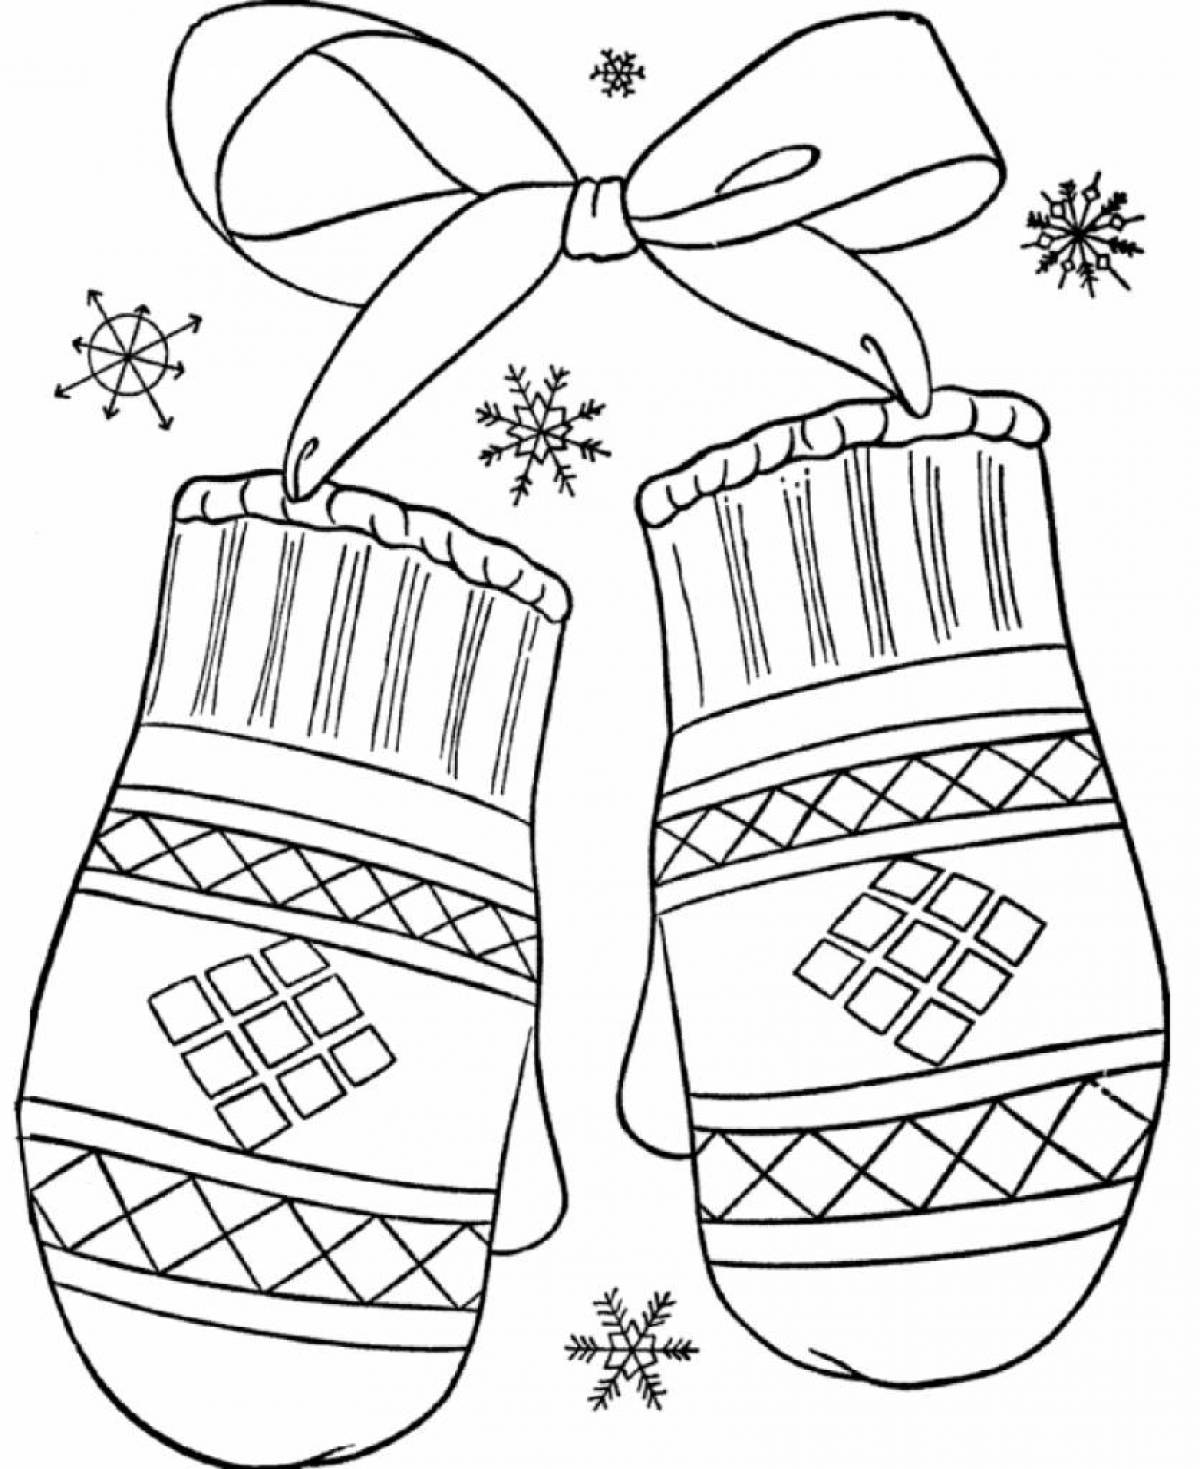 Coloring funny mitten